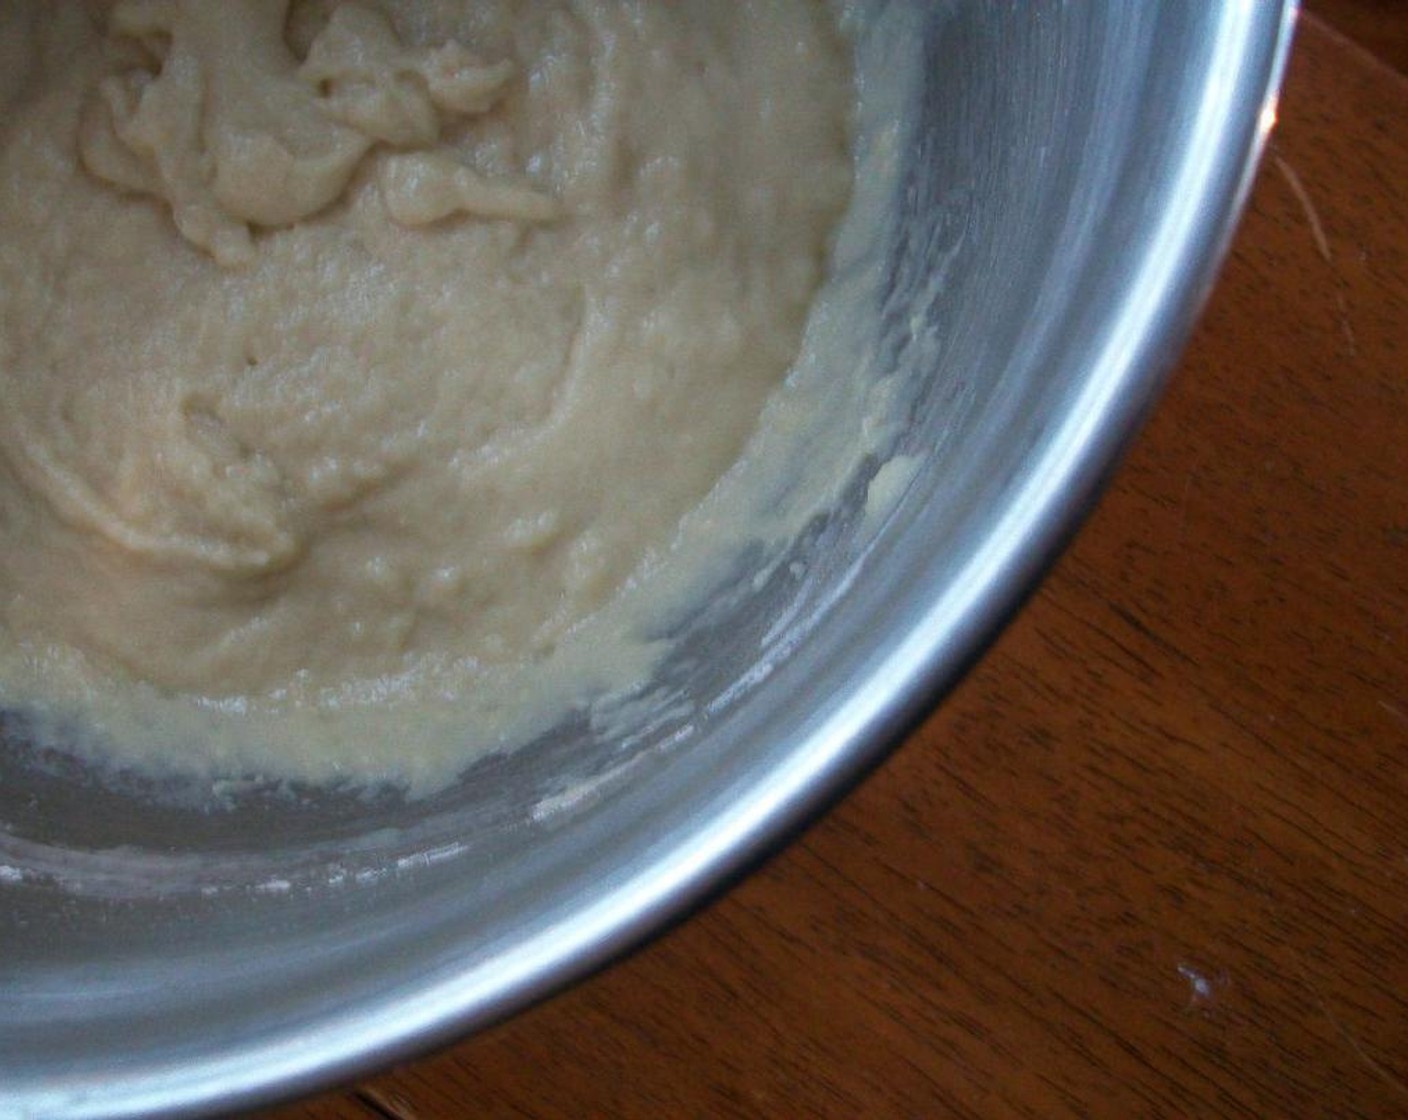 step 2 Sprinkle with Active Dry Yeast (1 1/8 tsp) and let it sit for a minute. Stir and pour into a bowl with All-Purpose Flour (2 cups). Mix just until combined and proof for one hour. The dough will be wet and sticky. Check dough about half way through to make sure the yeast is doing its job.